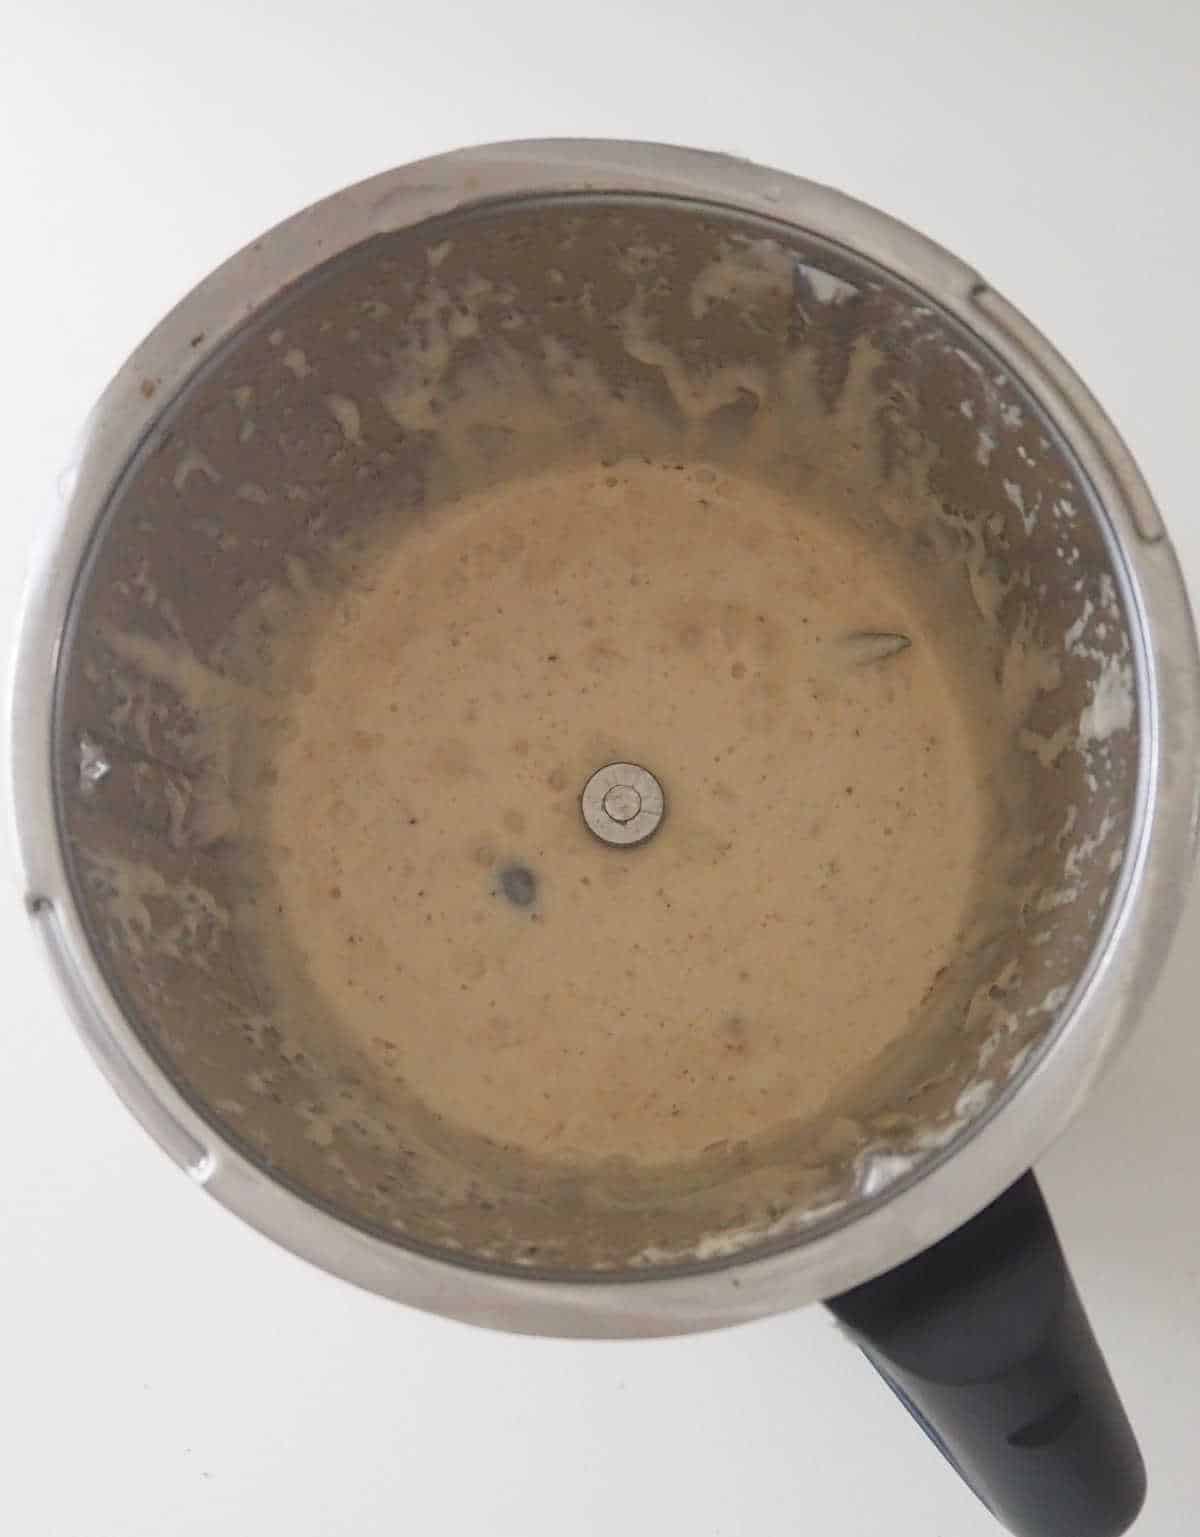 Banana Loaf mixture in a Thermomix bowl.